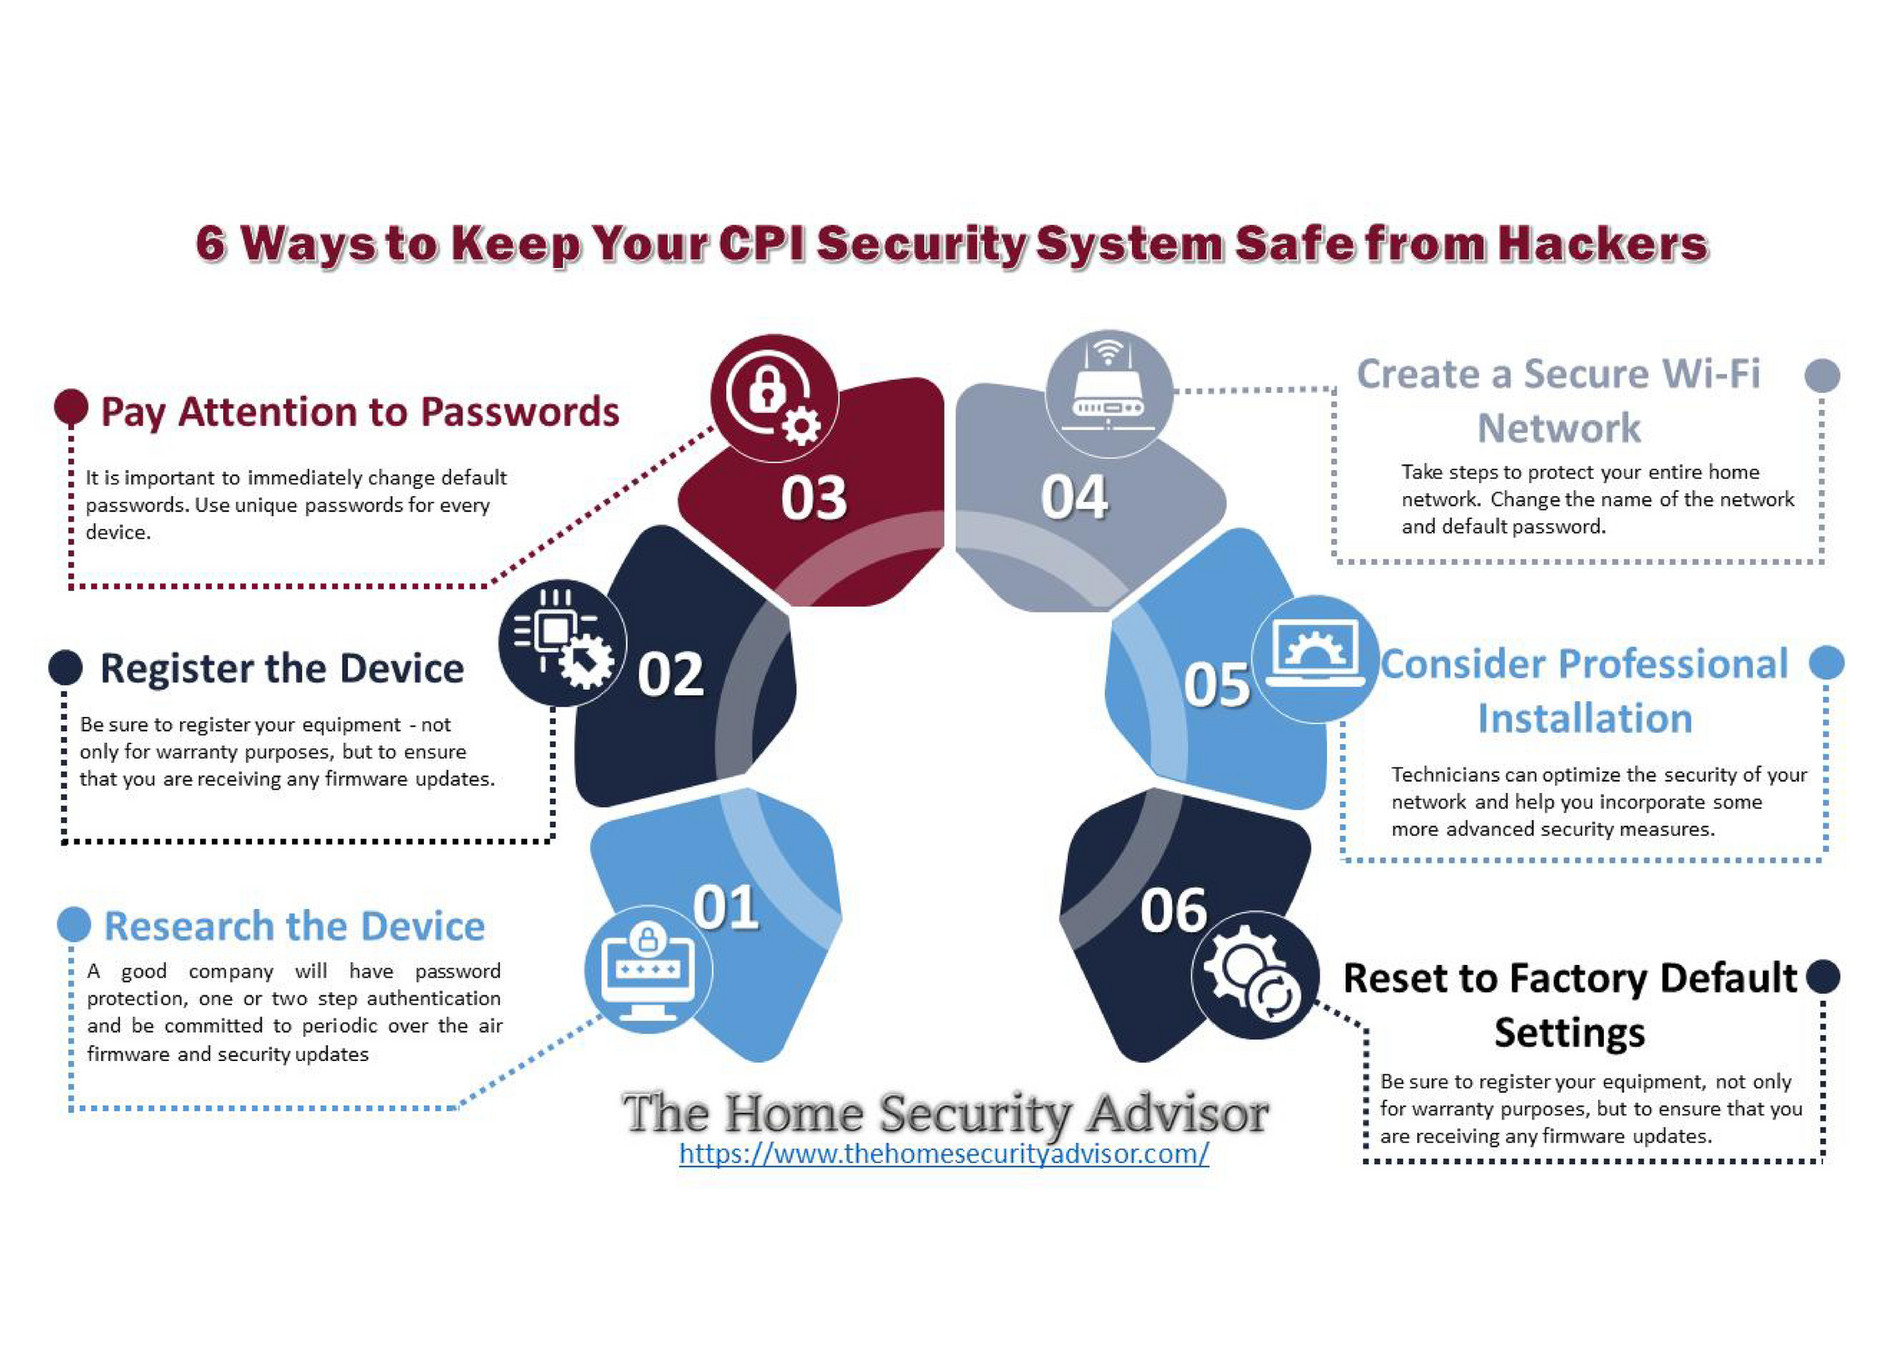 My publications - 6 Ways to CPI Security Systems Safe from Hackers